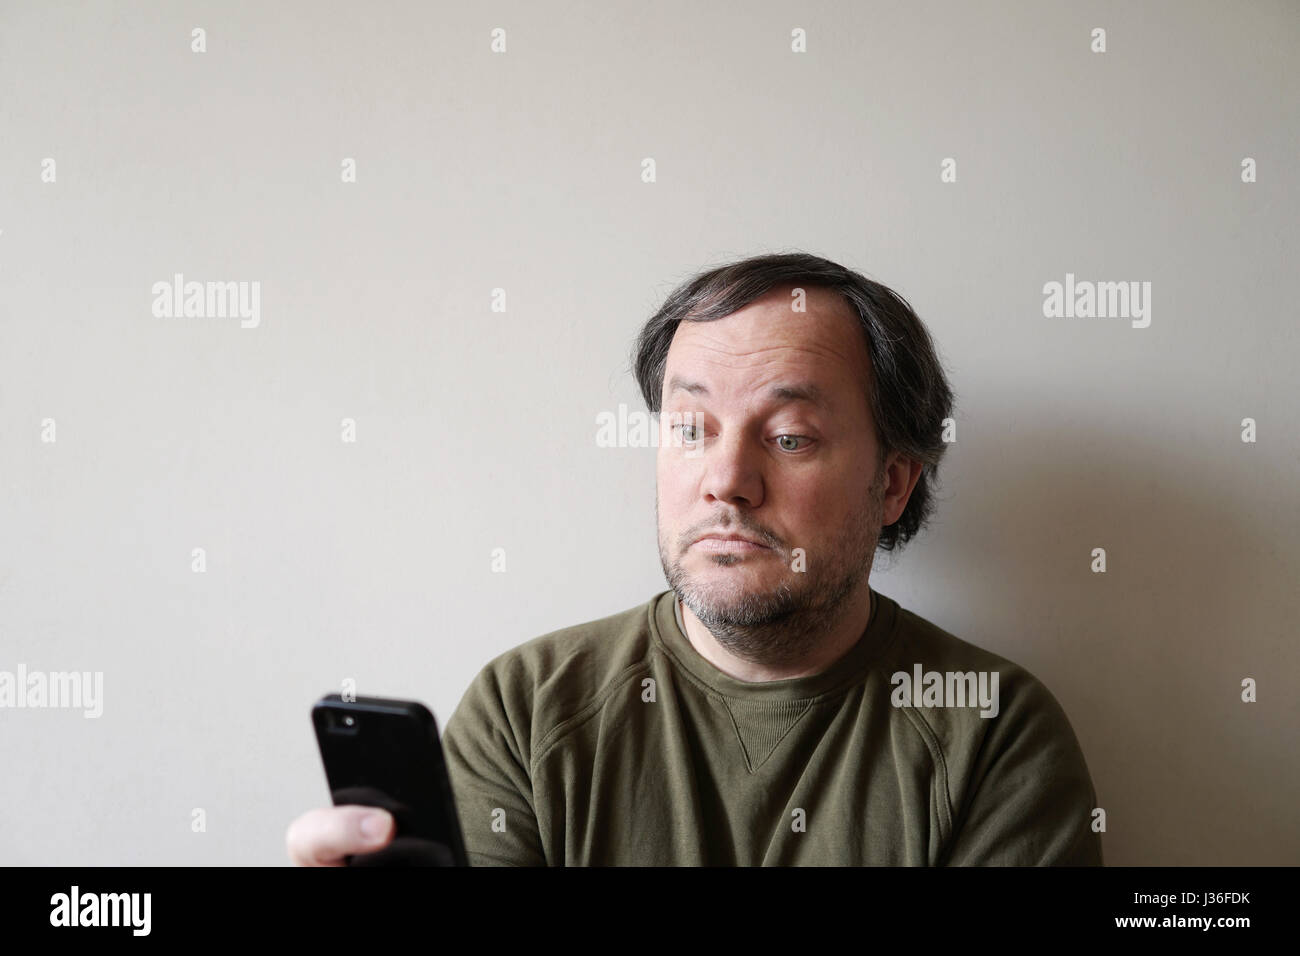 wide-eyed man looking at smartphone Stock Photo